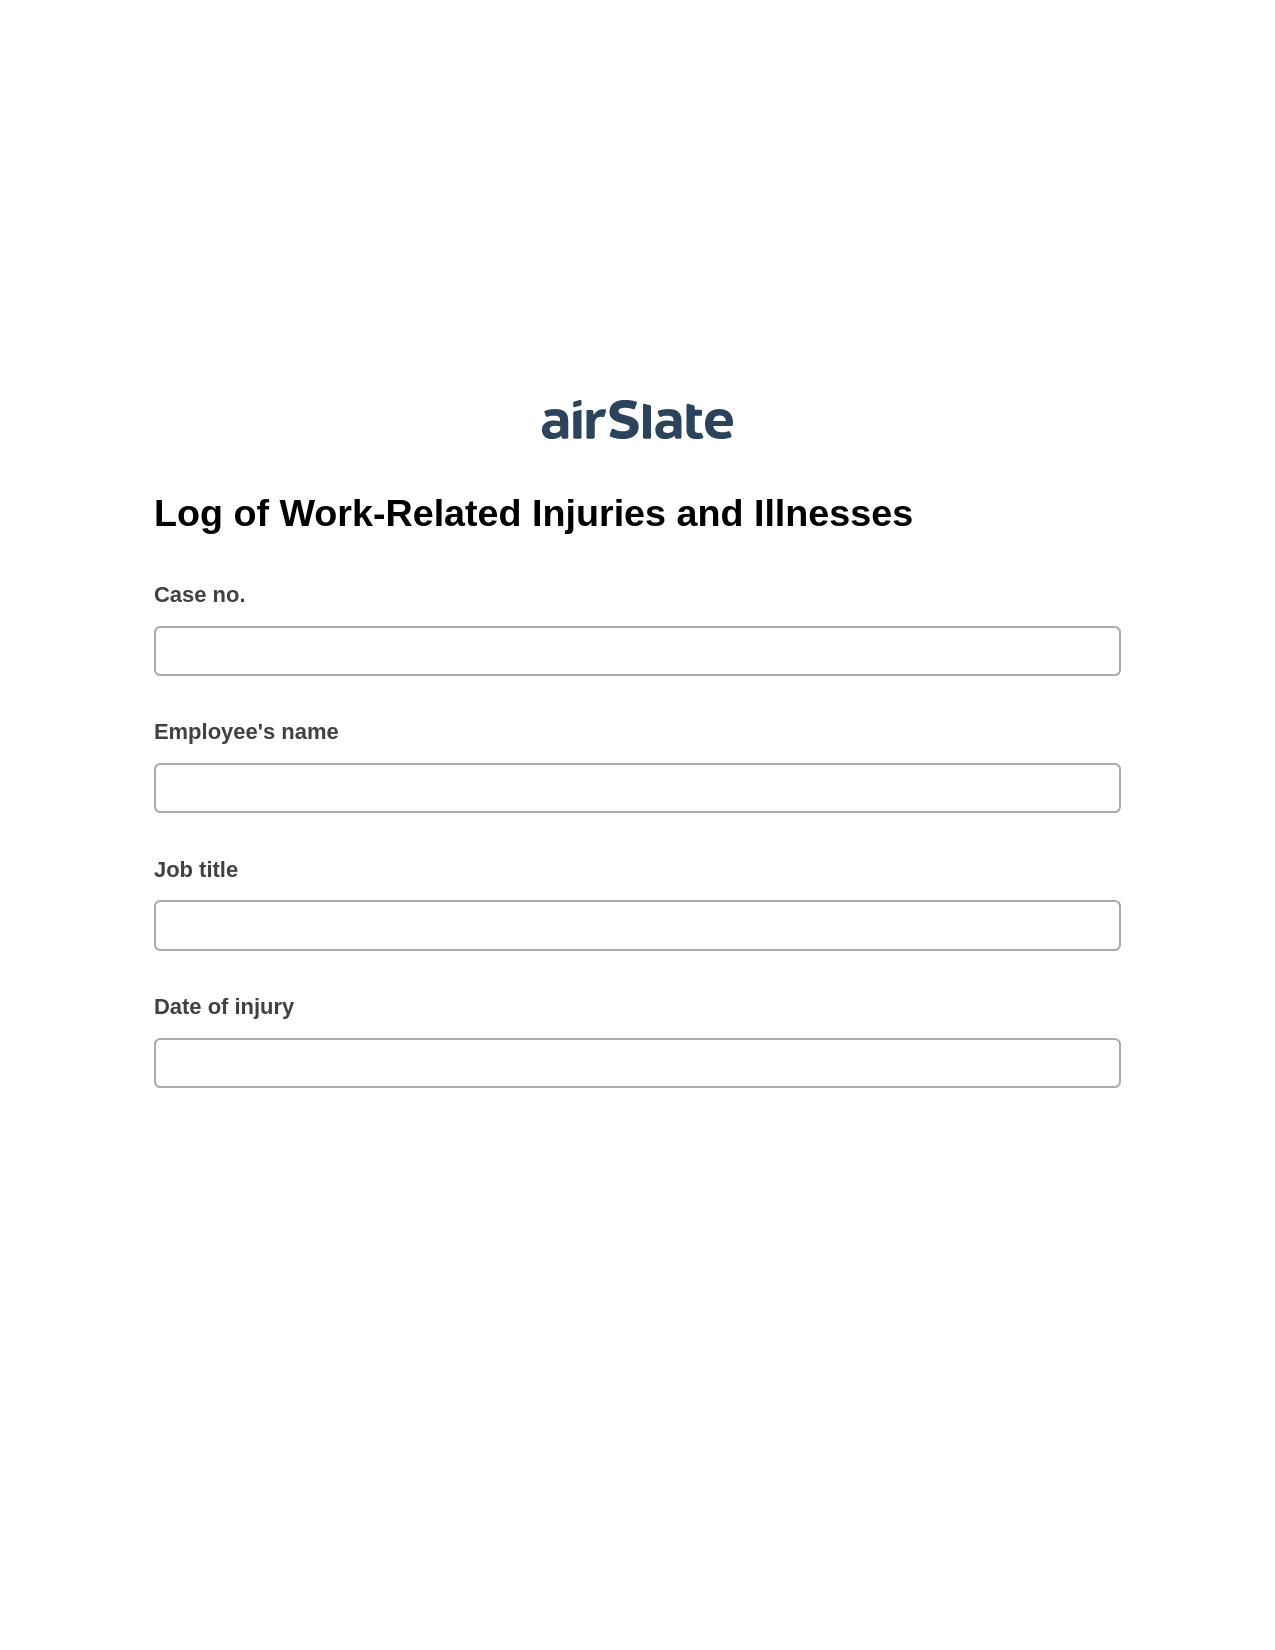 Log of Work-Related Injuries and Illnesses Pre-fill from another Slate Bot, Create Slate Reminder Bot, Archive to SharePoint Folder Bot